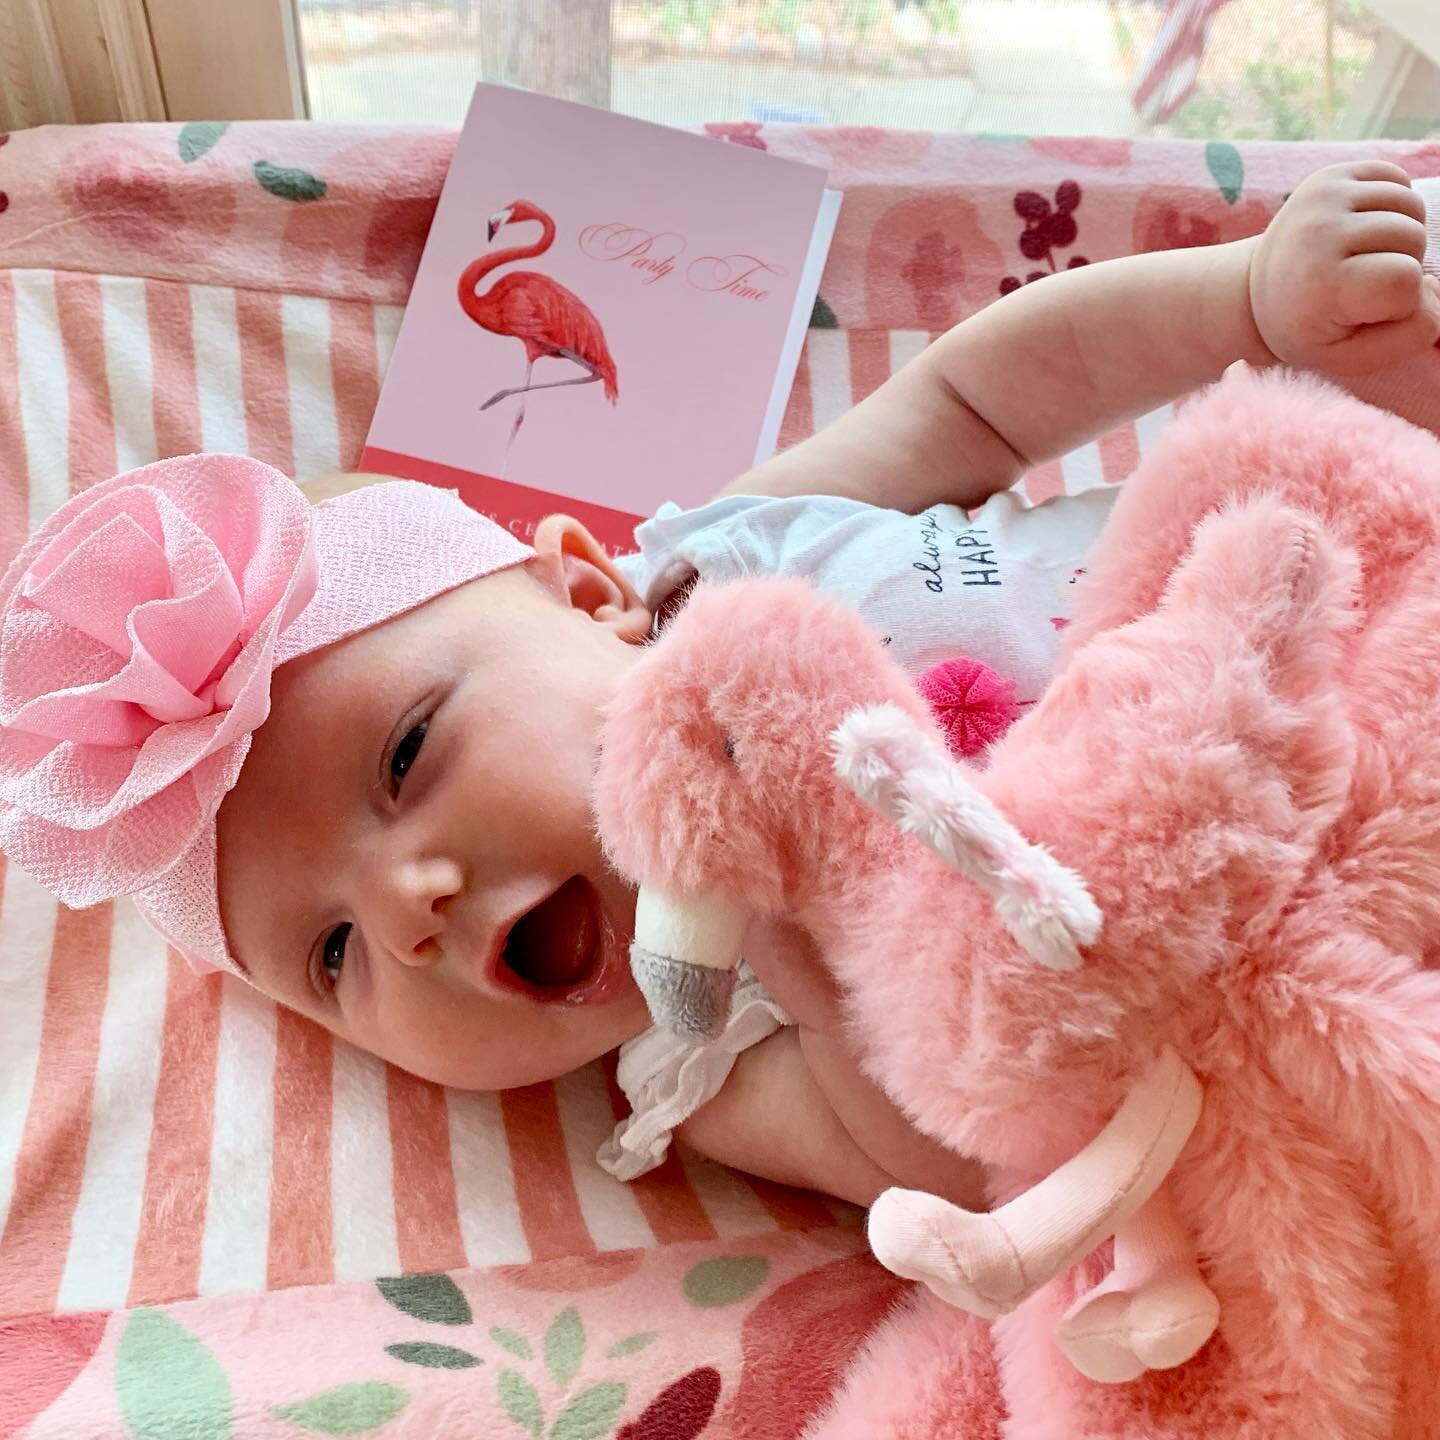 This styled shoot is brought to you by little miss Everleigh Sage&rsquo;s infectious smiles 🥰 + her thrifty $1 🦩flamingo shirt from @onceuponachild_southcolospgs + her precious flamingo lovey from @amandafro88 💖 &amp; stylish headband from aunt Jo